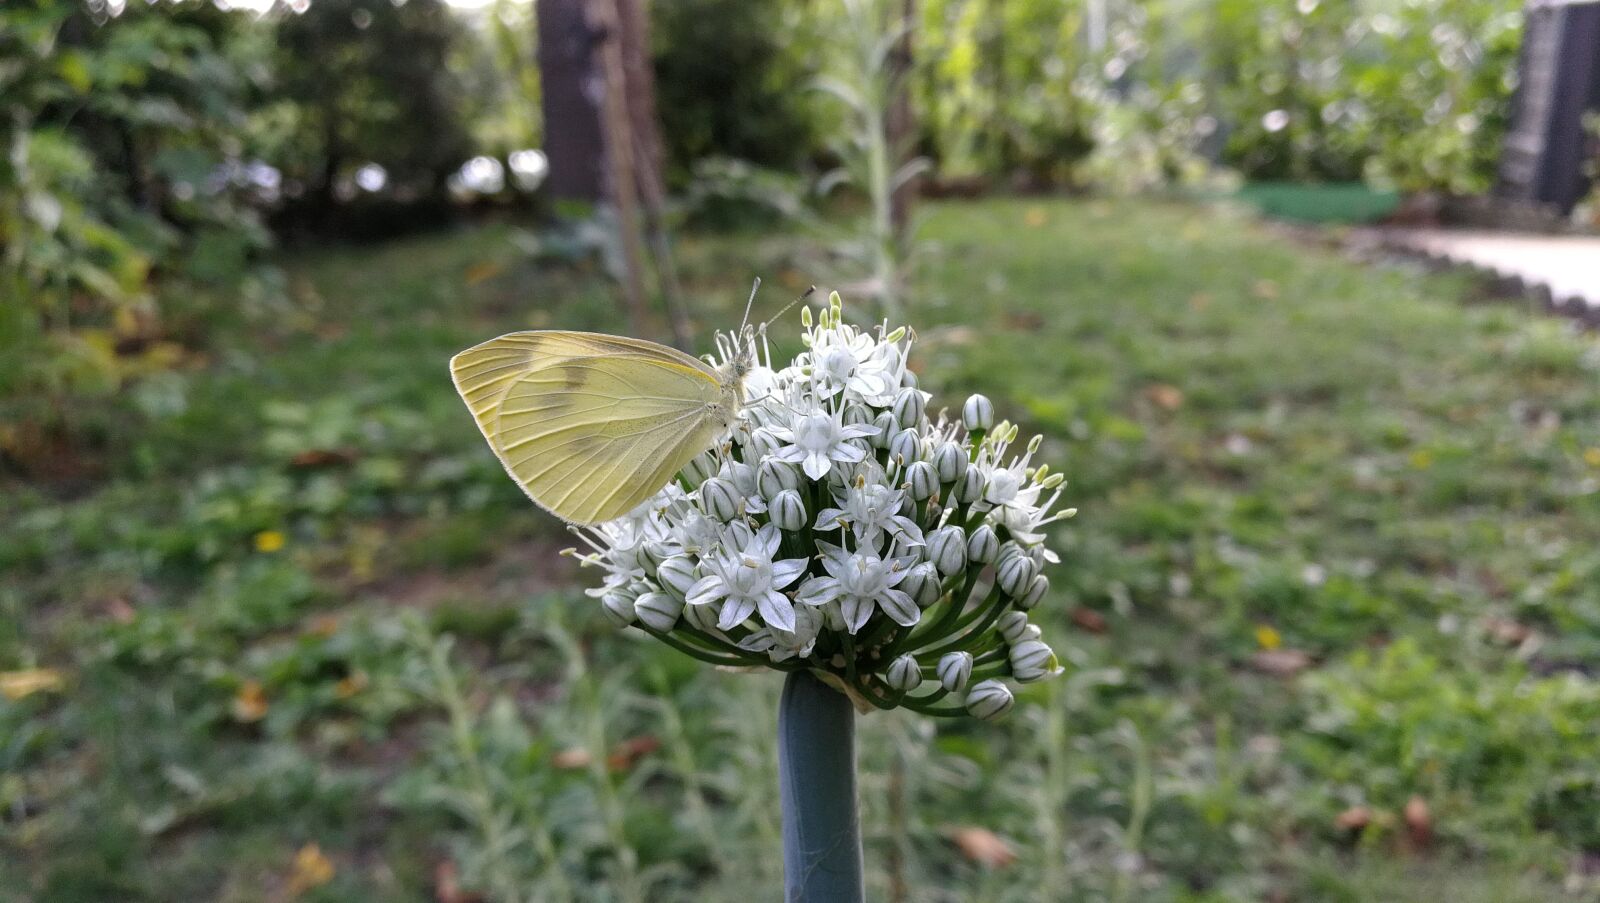 HUAWEI P10 sample photo. Butterfly, flower, nature photography